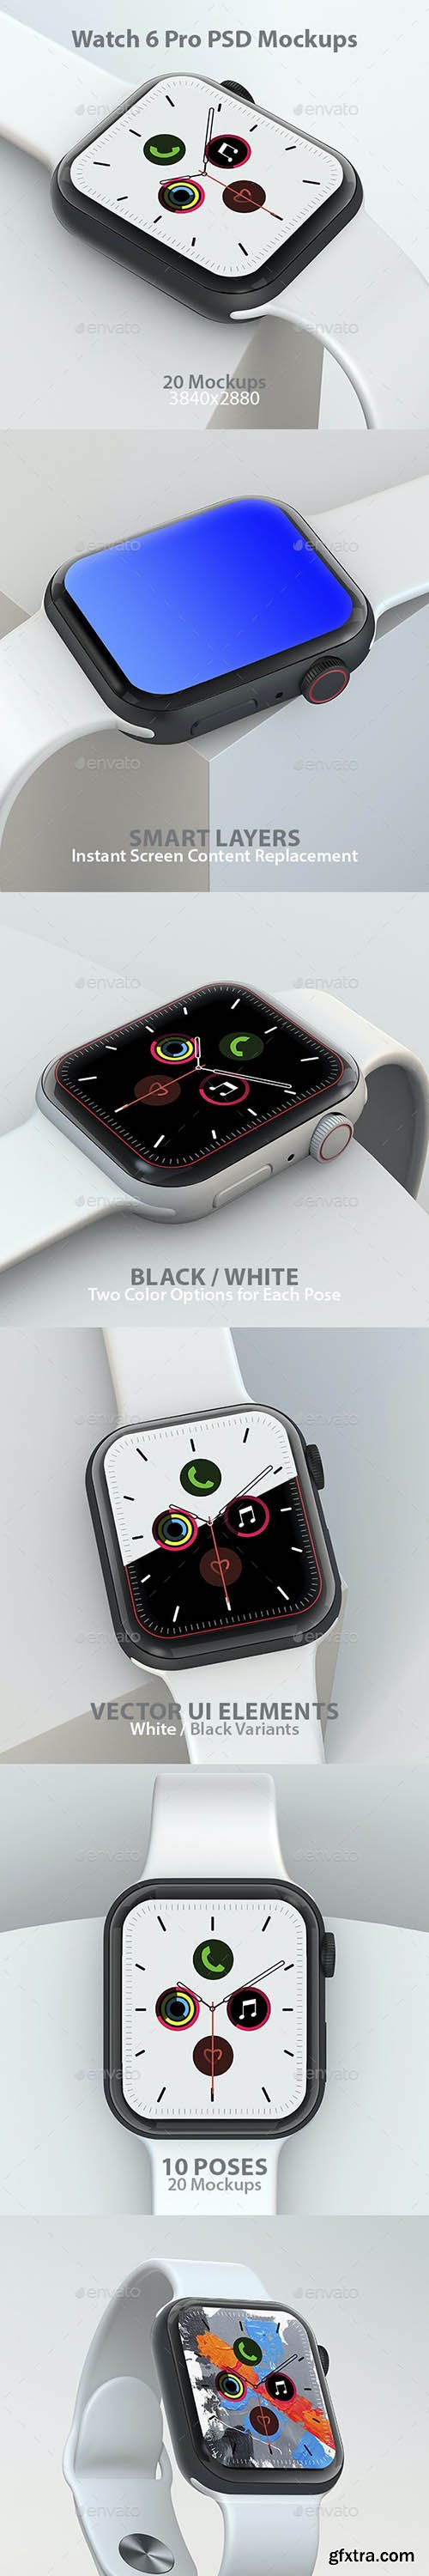 GraphicRiver - Watch 6 Pro PSD Mock-ups 28524424